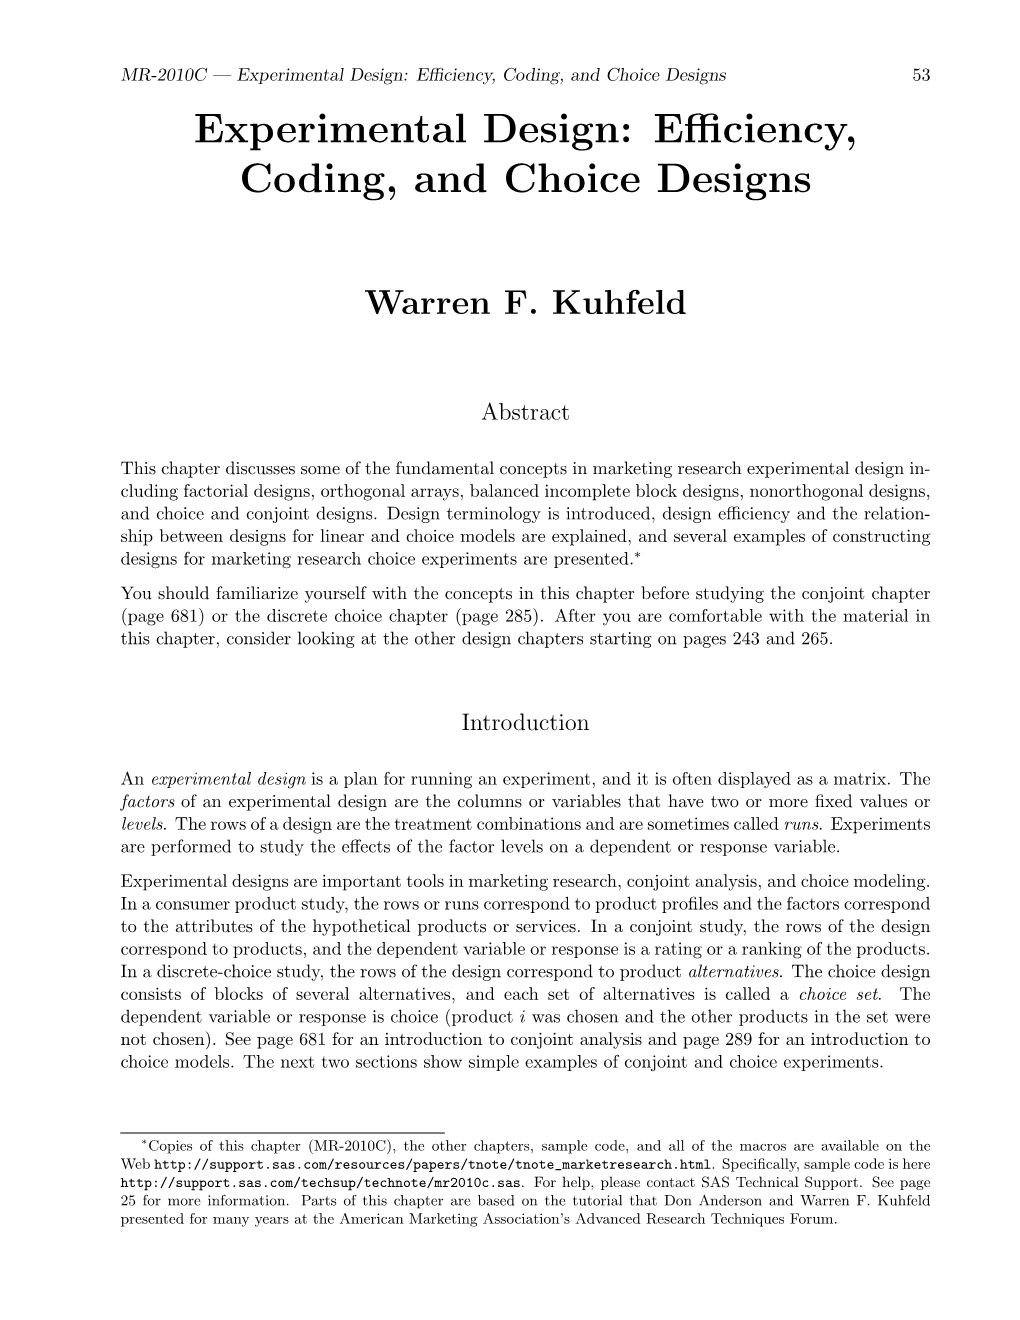 Experimental Design: Efficiency, Coding, and Choice Designs